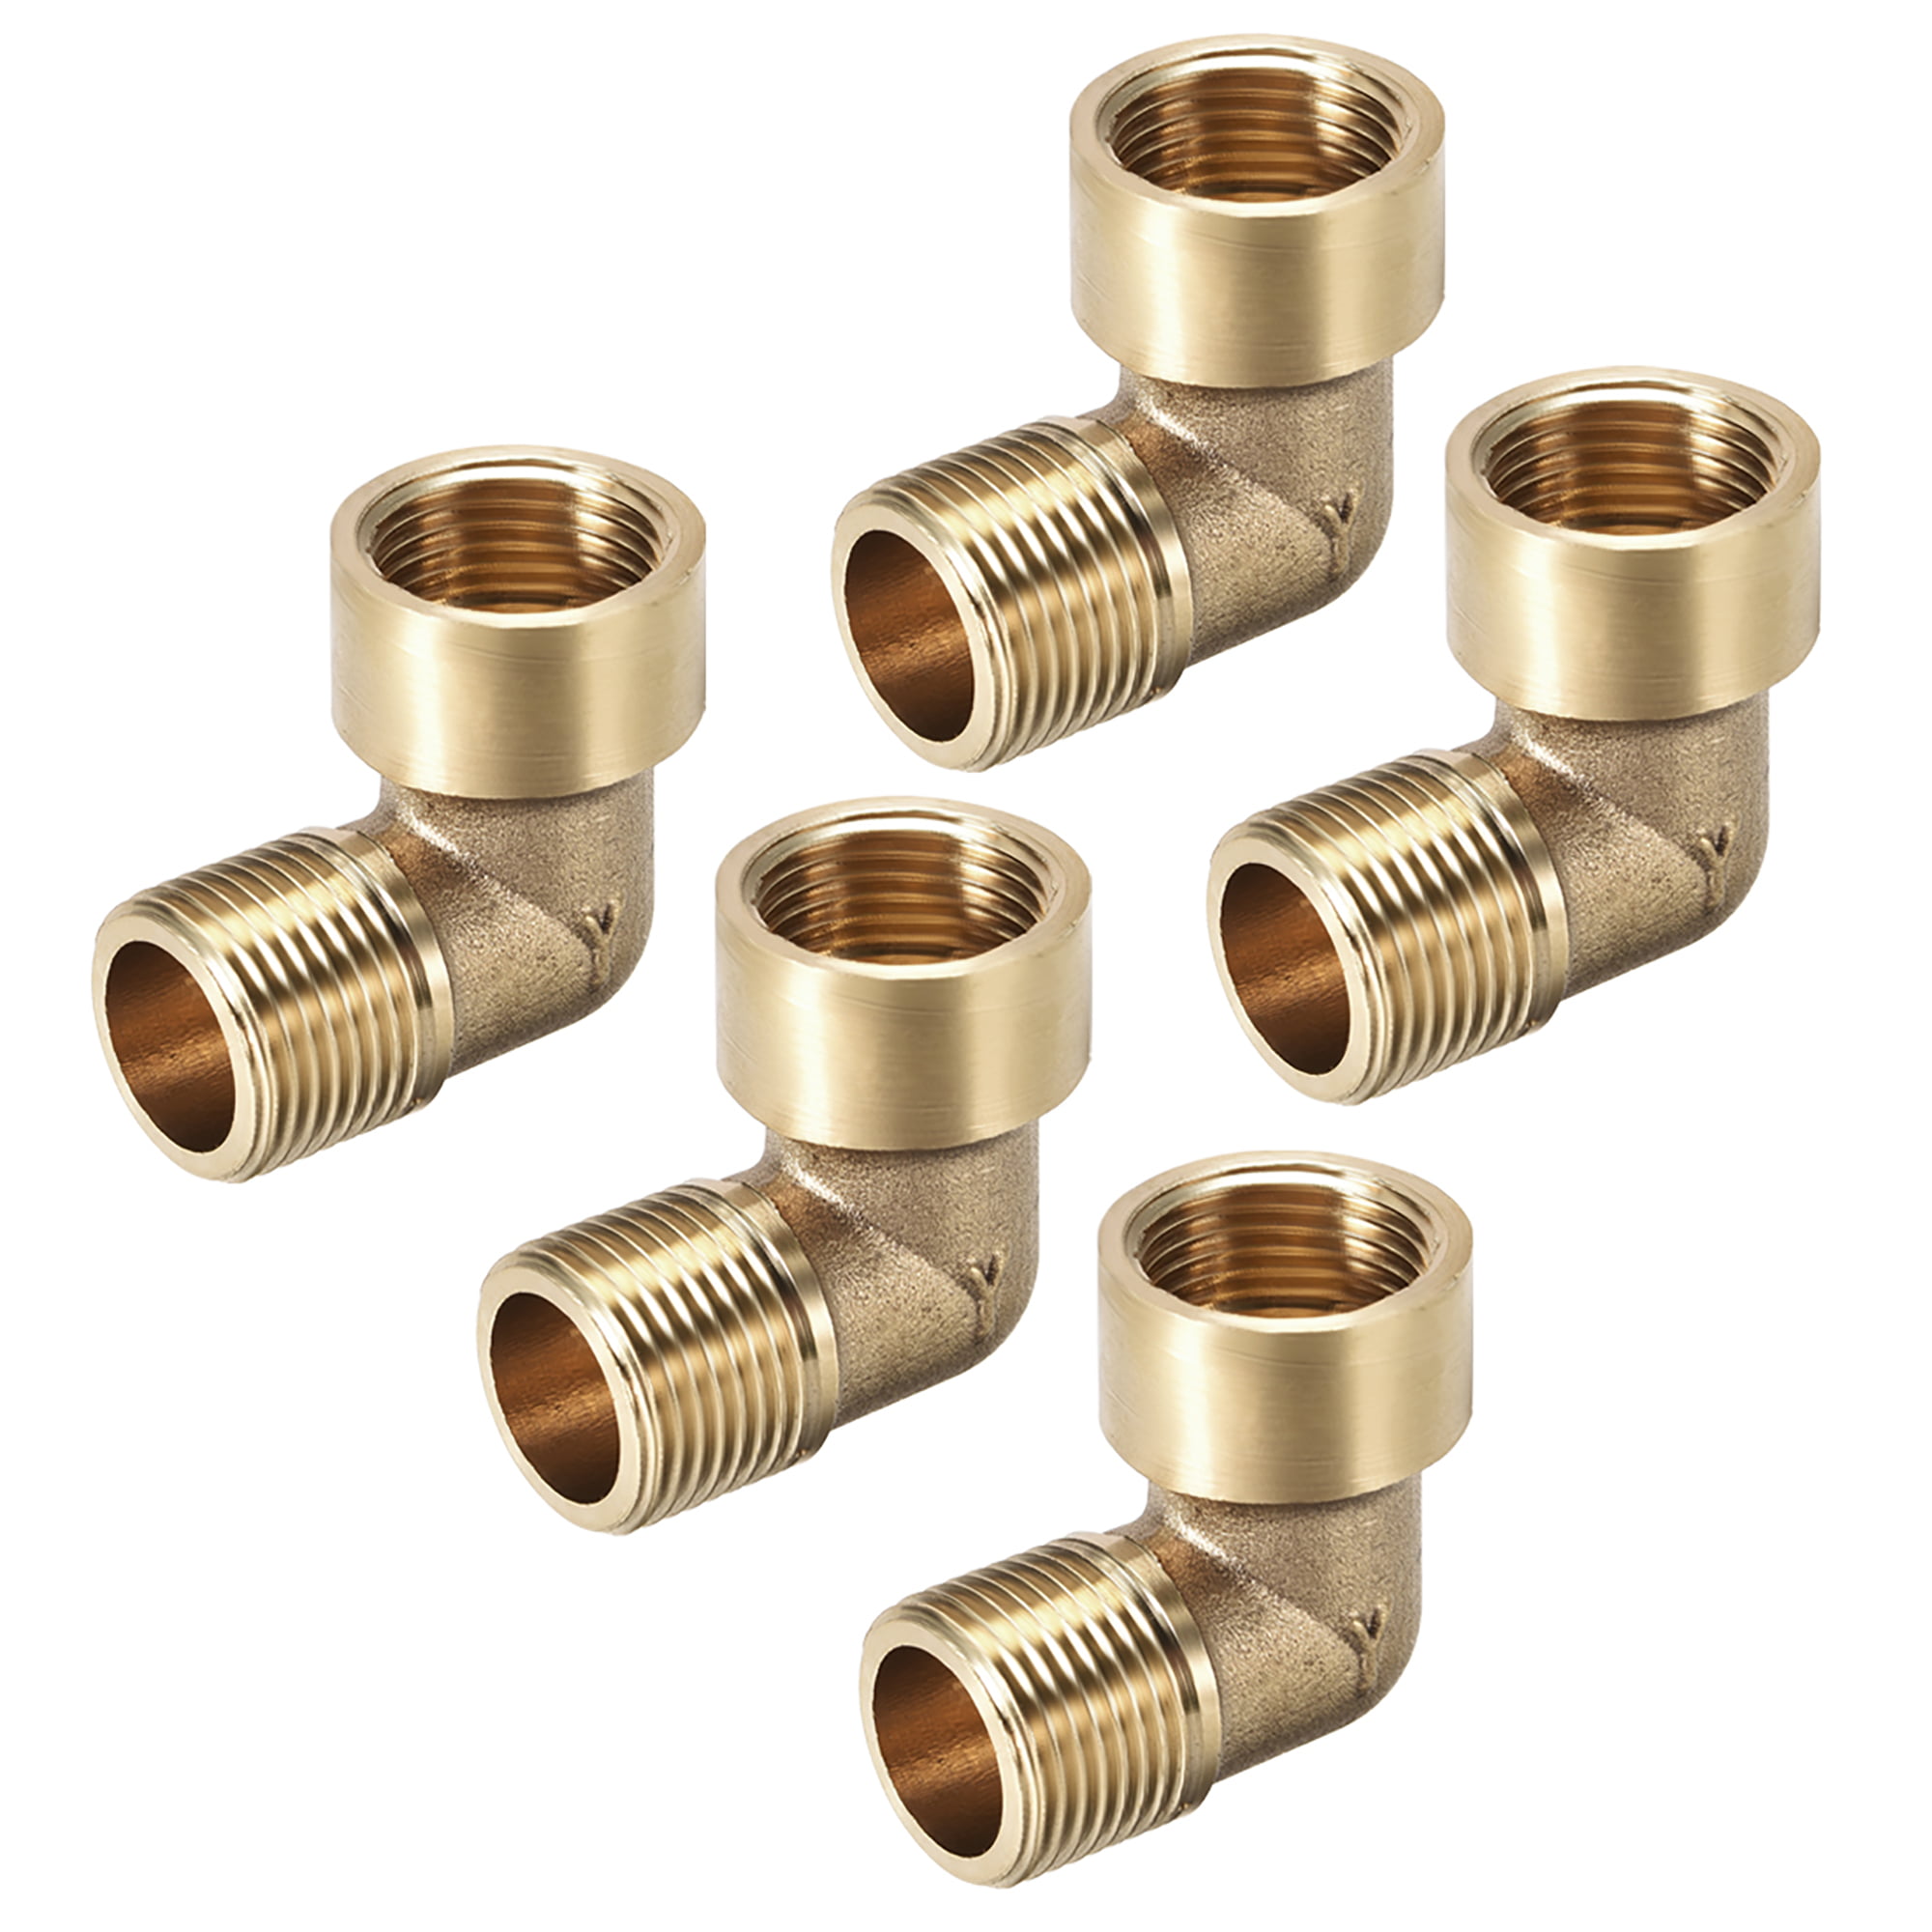 1/8 1/4 BSPP Connection Elbow Female-Male Pipe Brass Adapter Copper Connector 5 